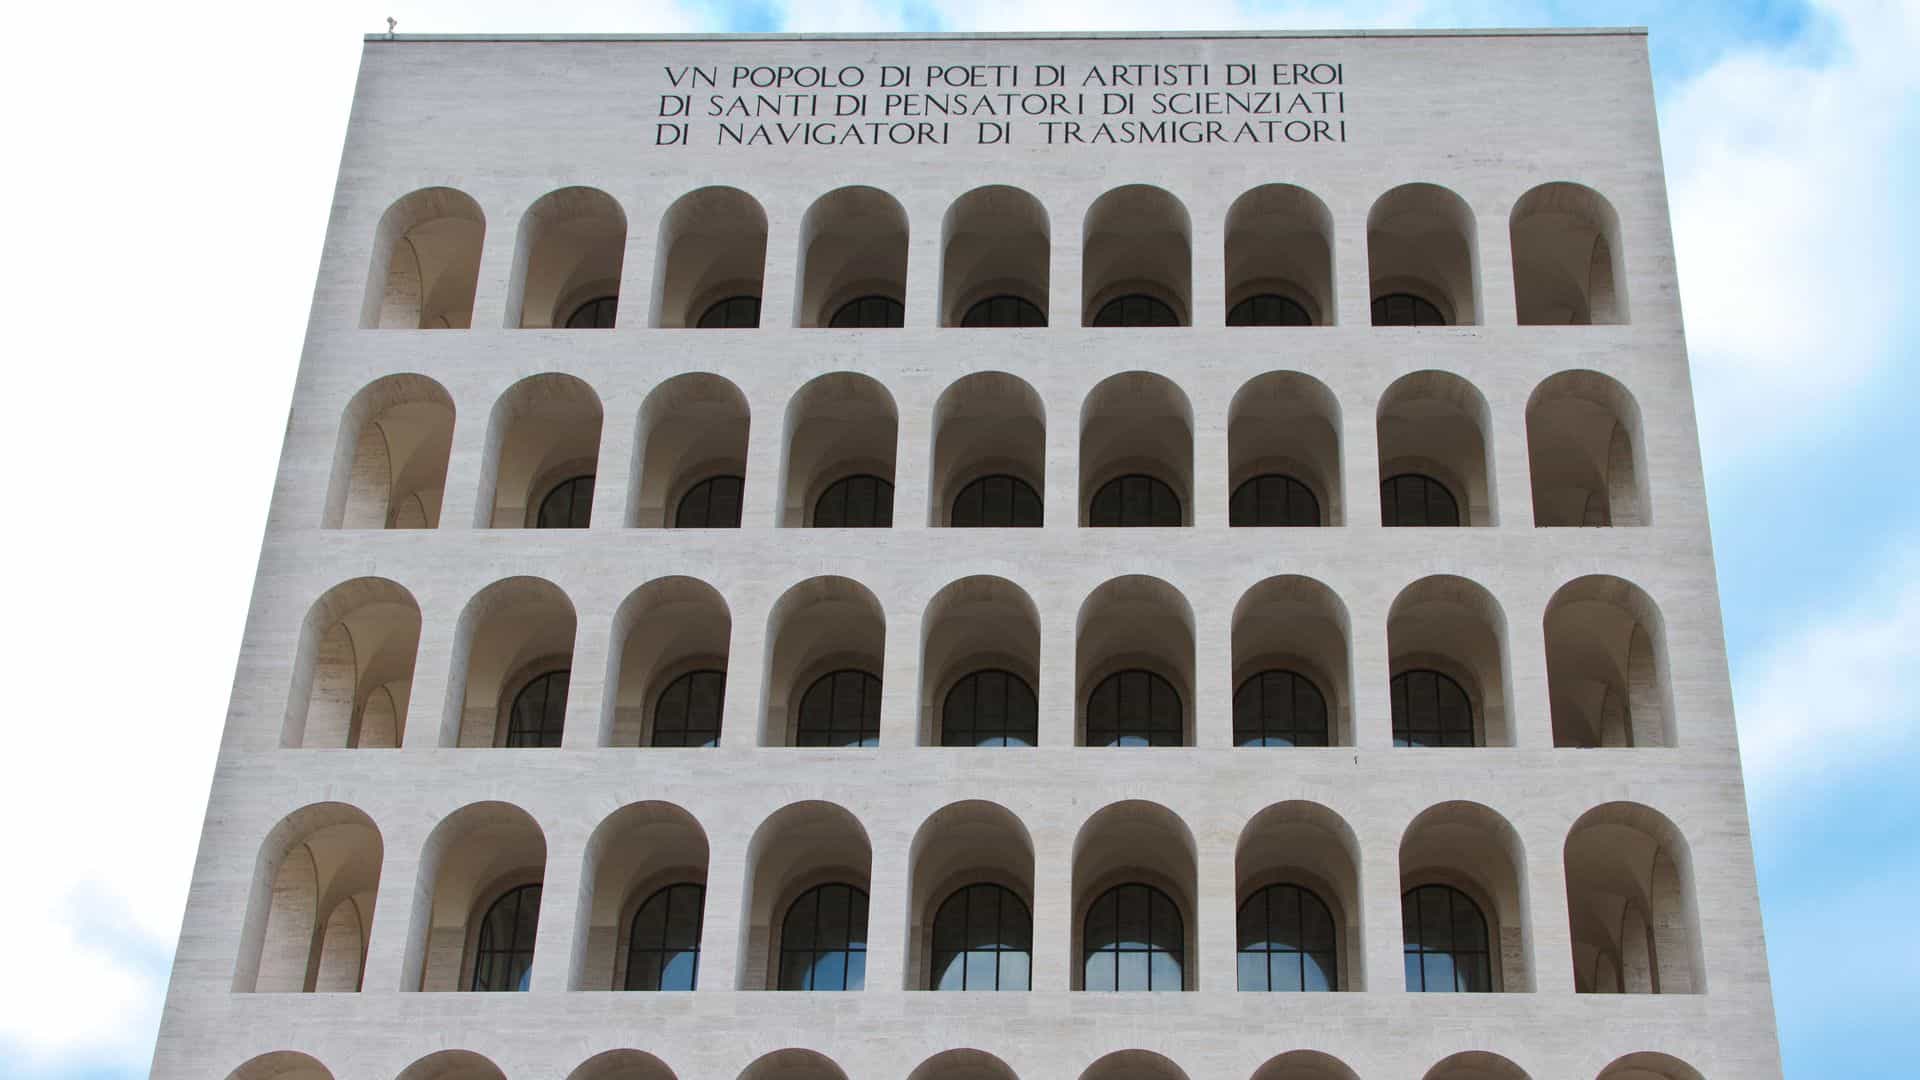 The Facade of the Palace of the Italian Civilization in EUR, Rome.